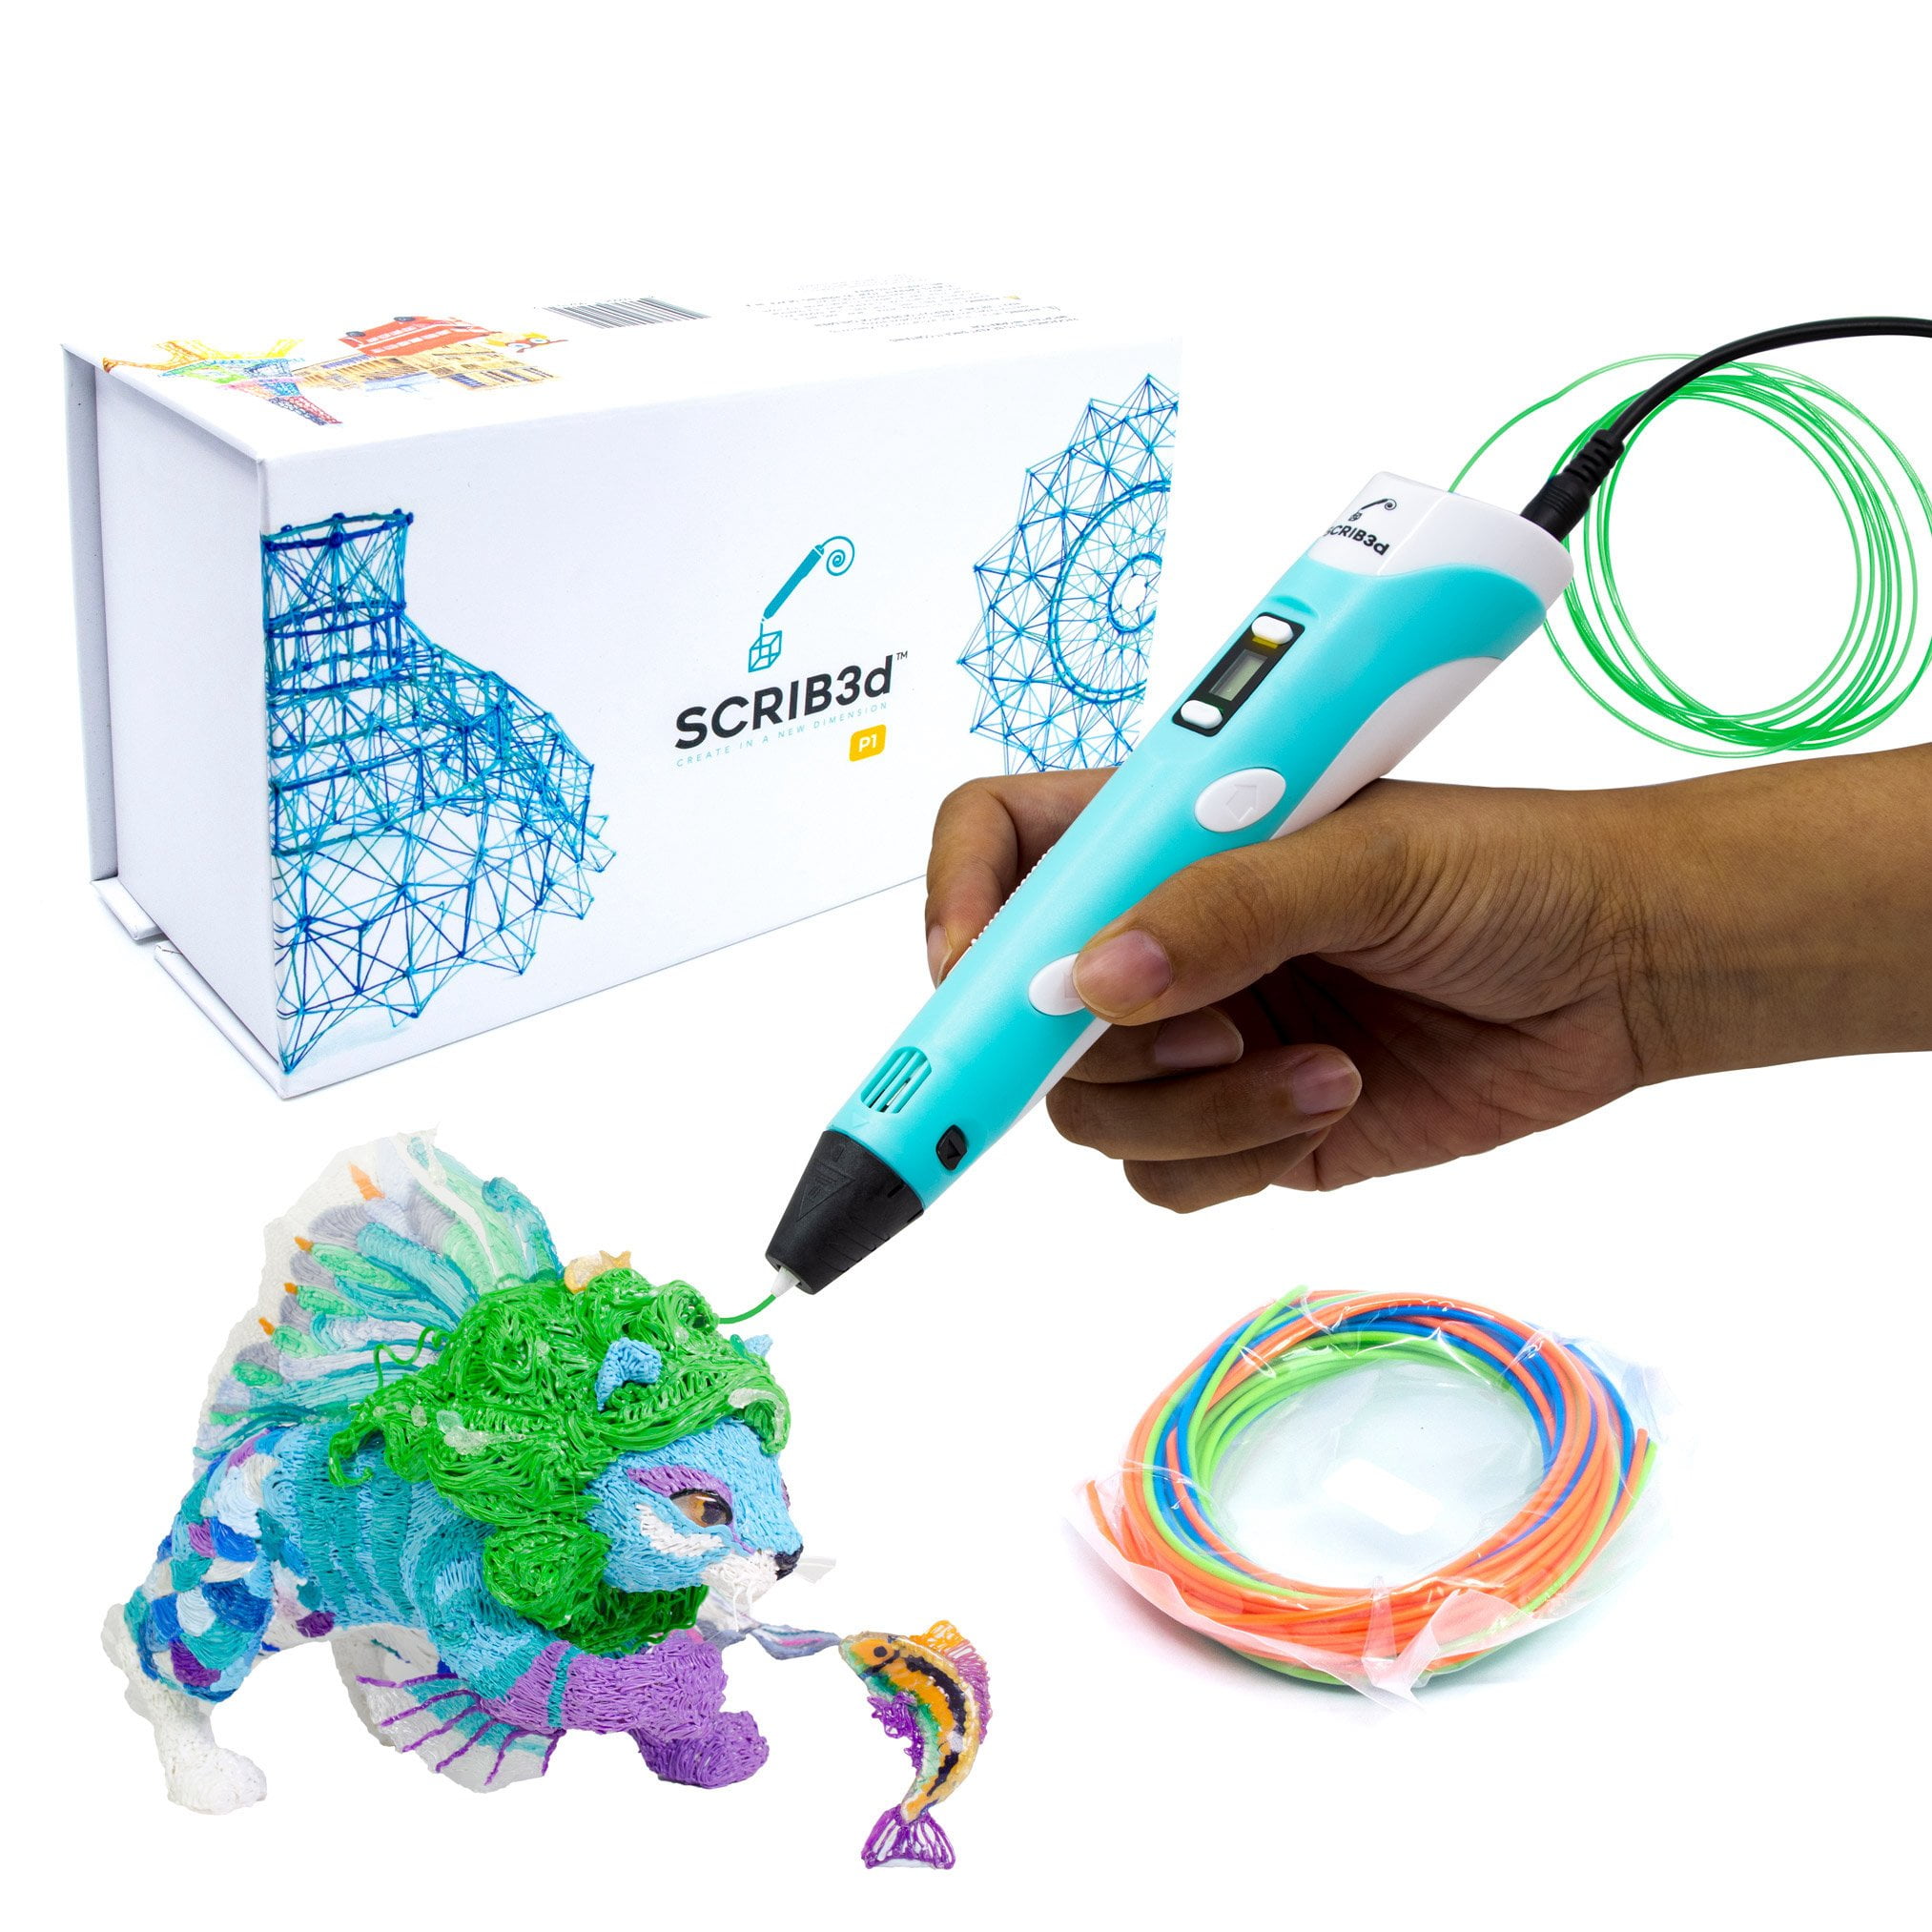 zwanger Politiebureau koepel SCRIB3D P1 3D Printing Pen with Display - Includes 3D Pen, 3 Starter Colors  of PLA Filament, Stencil Book + Project Guide, and Charger - Walmart.com